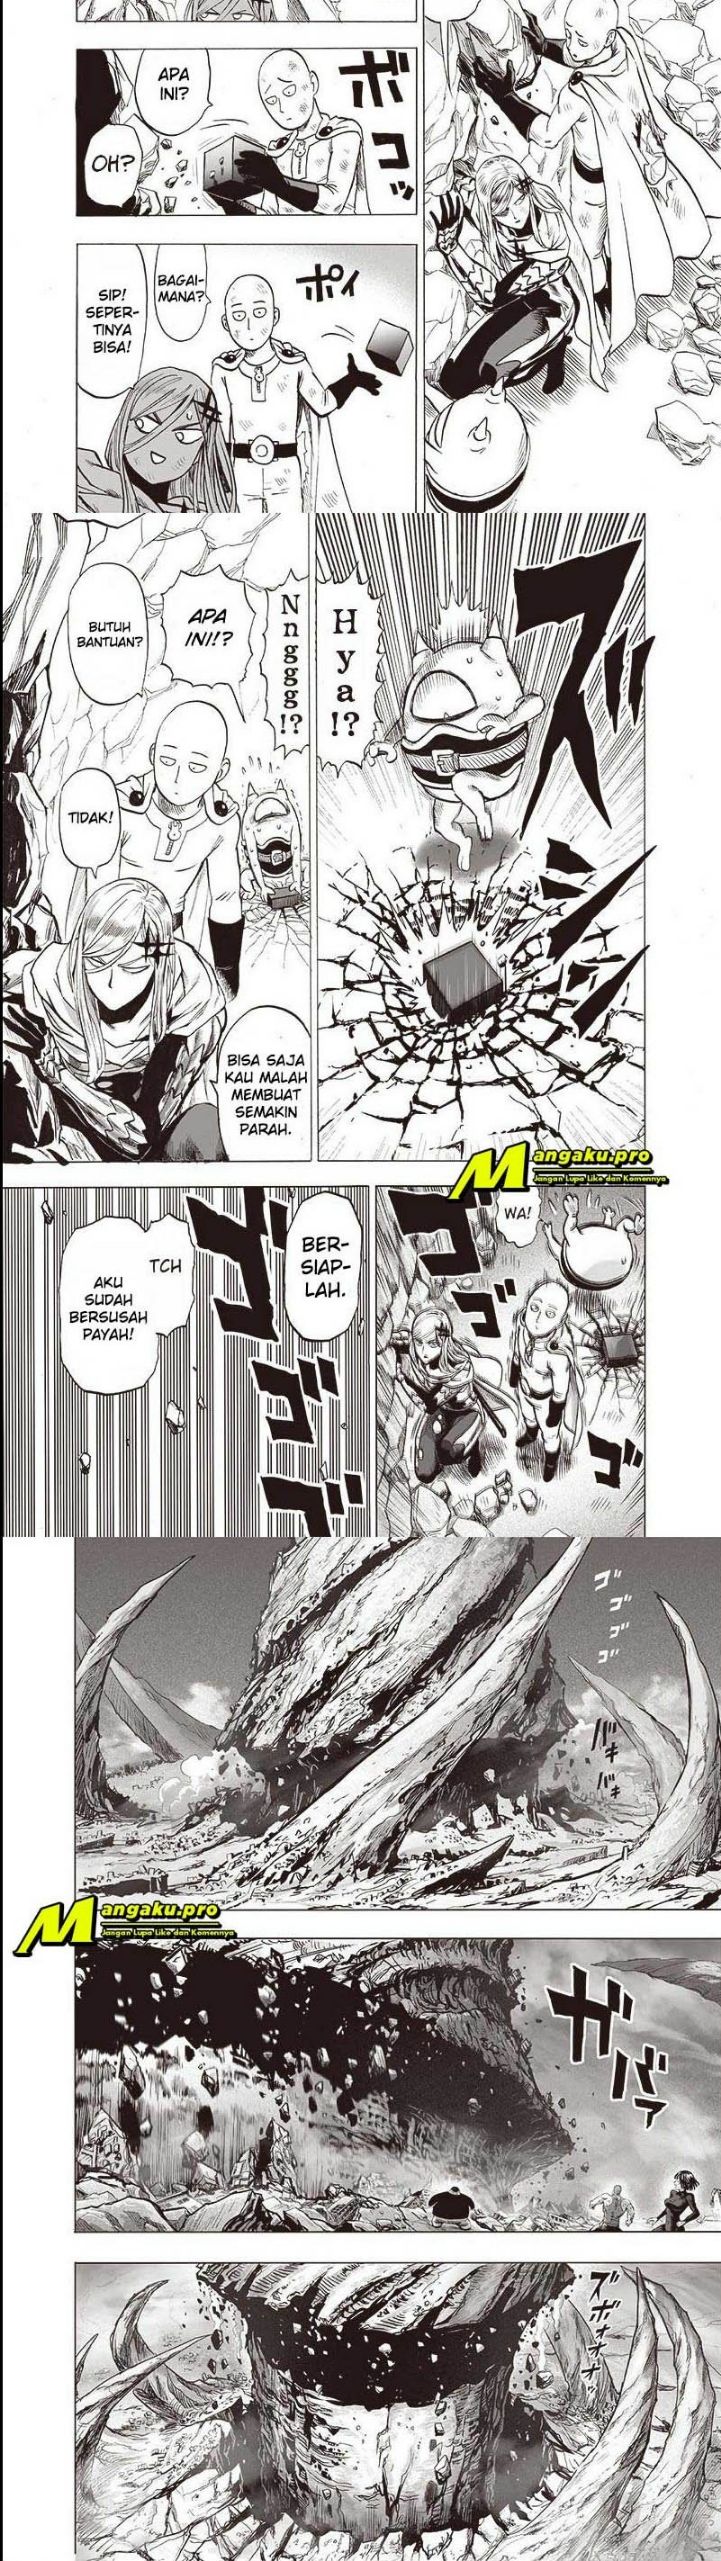 One Punch Man Chapter 188